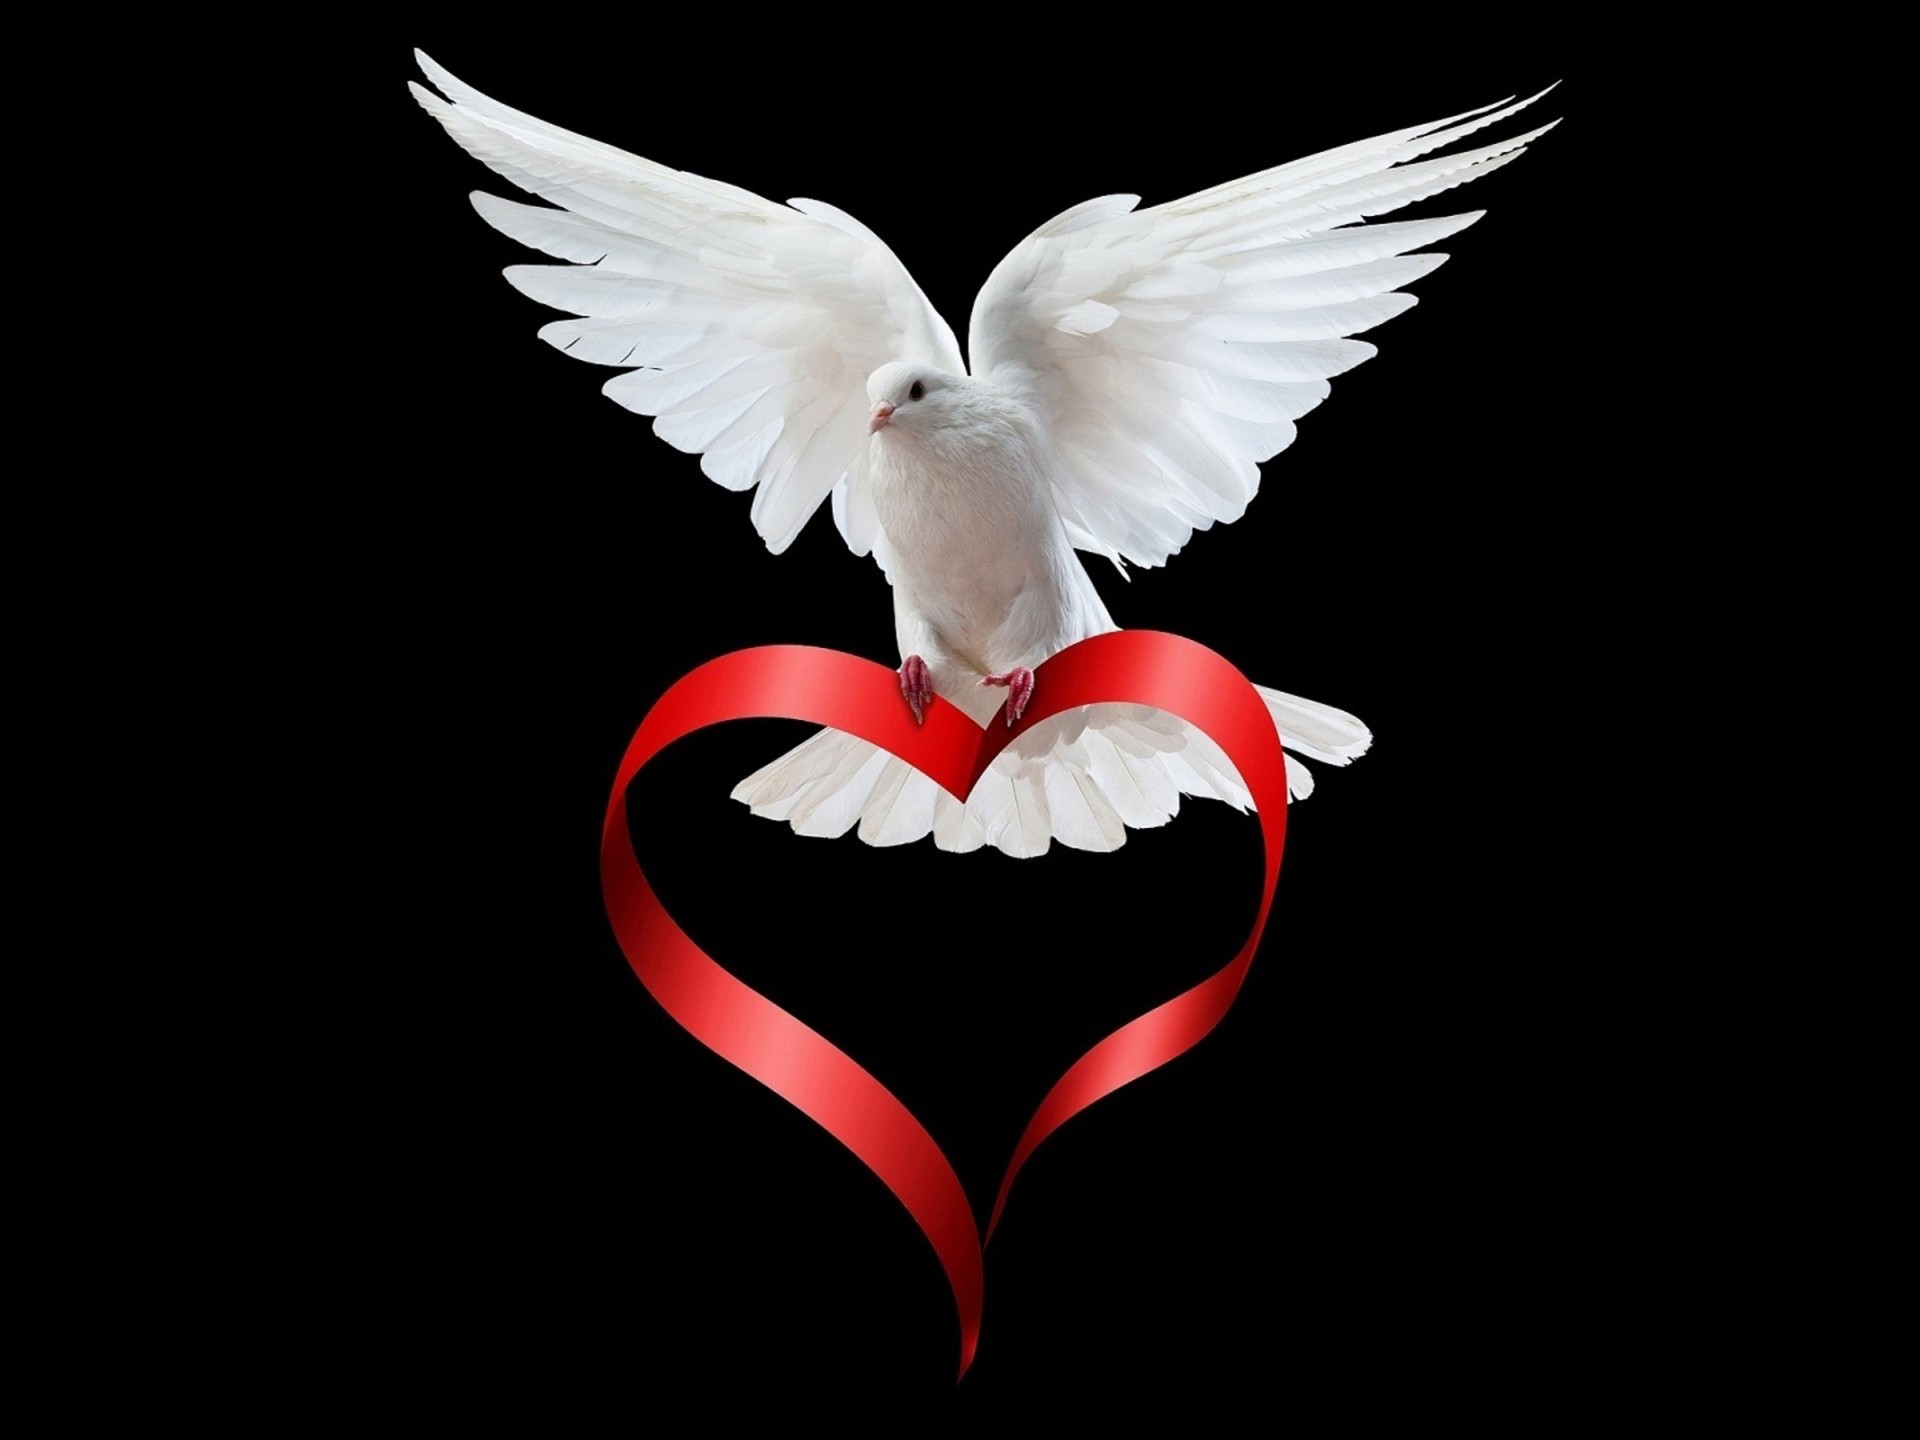 hd love wallpaper download for android,wing,red,love,heart,emblem